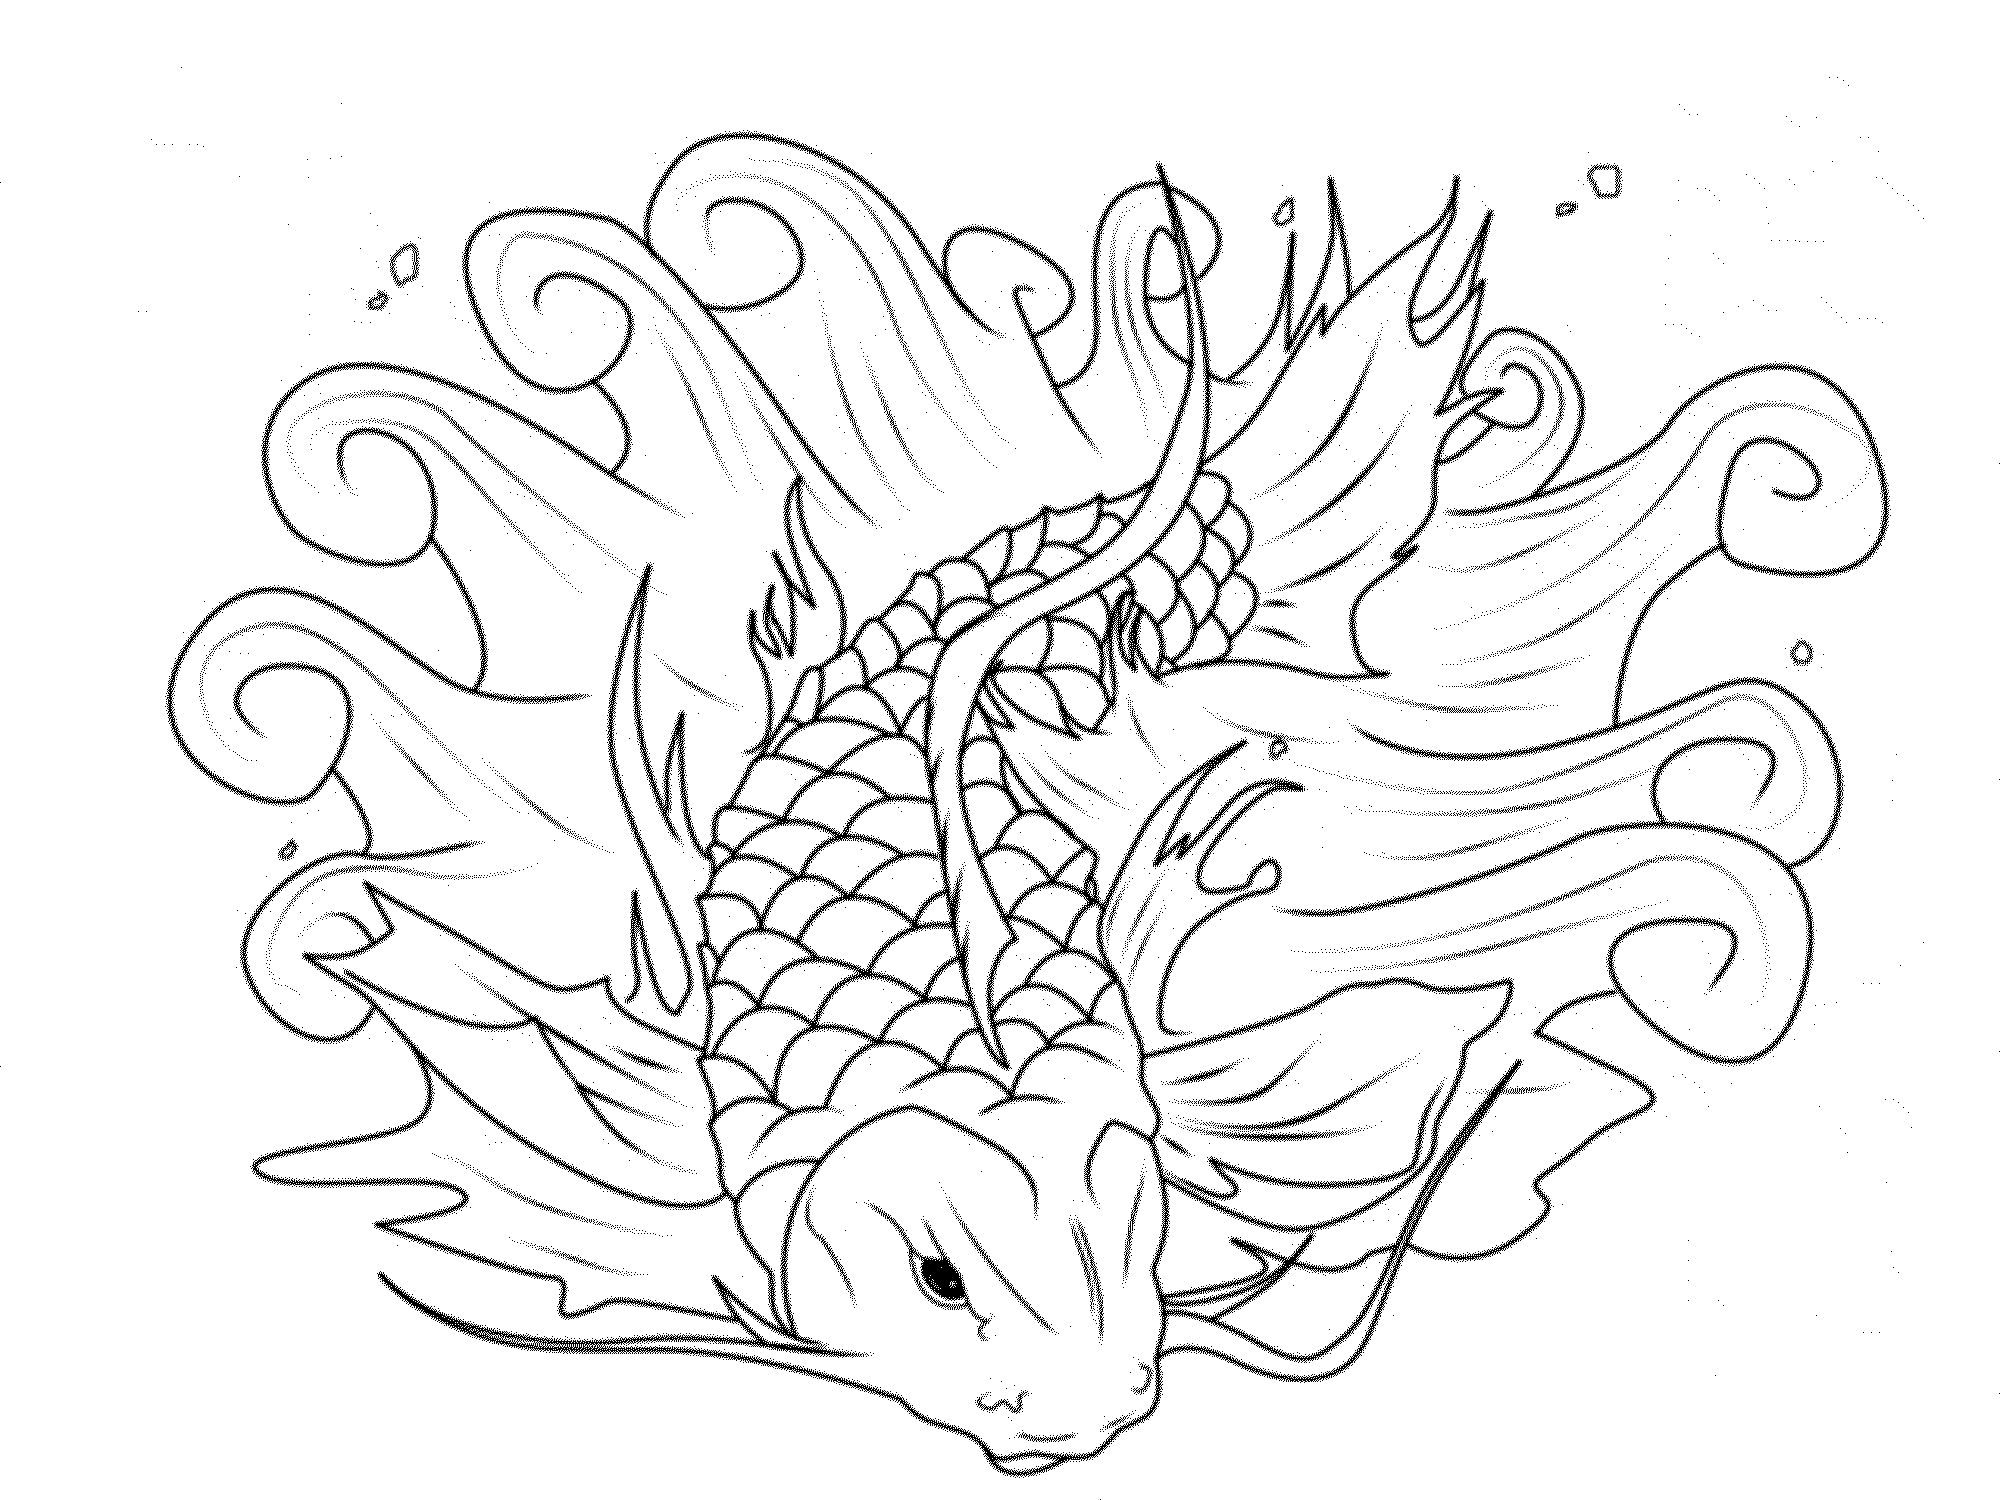 koi-fish-coloring-page | | BestAppsForKids.com